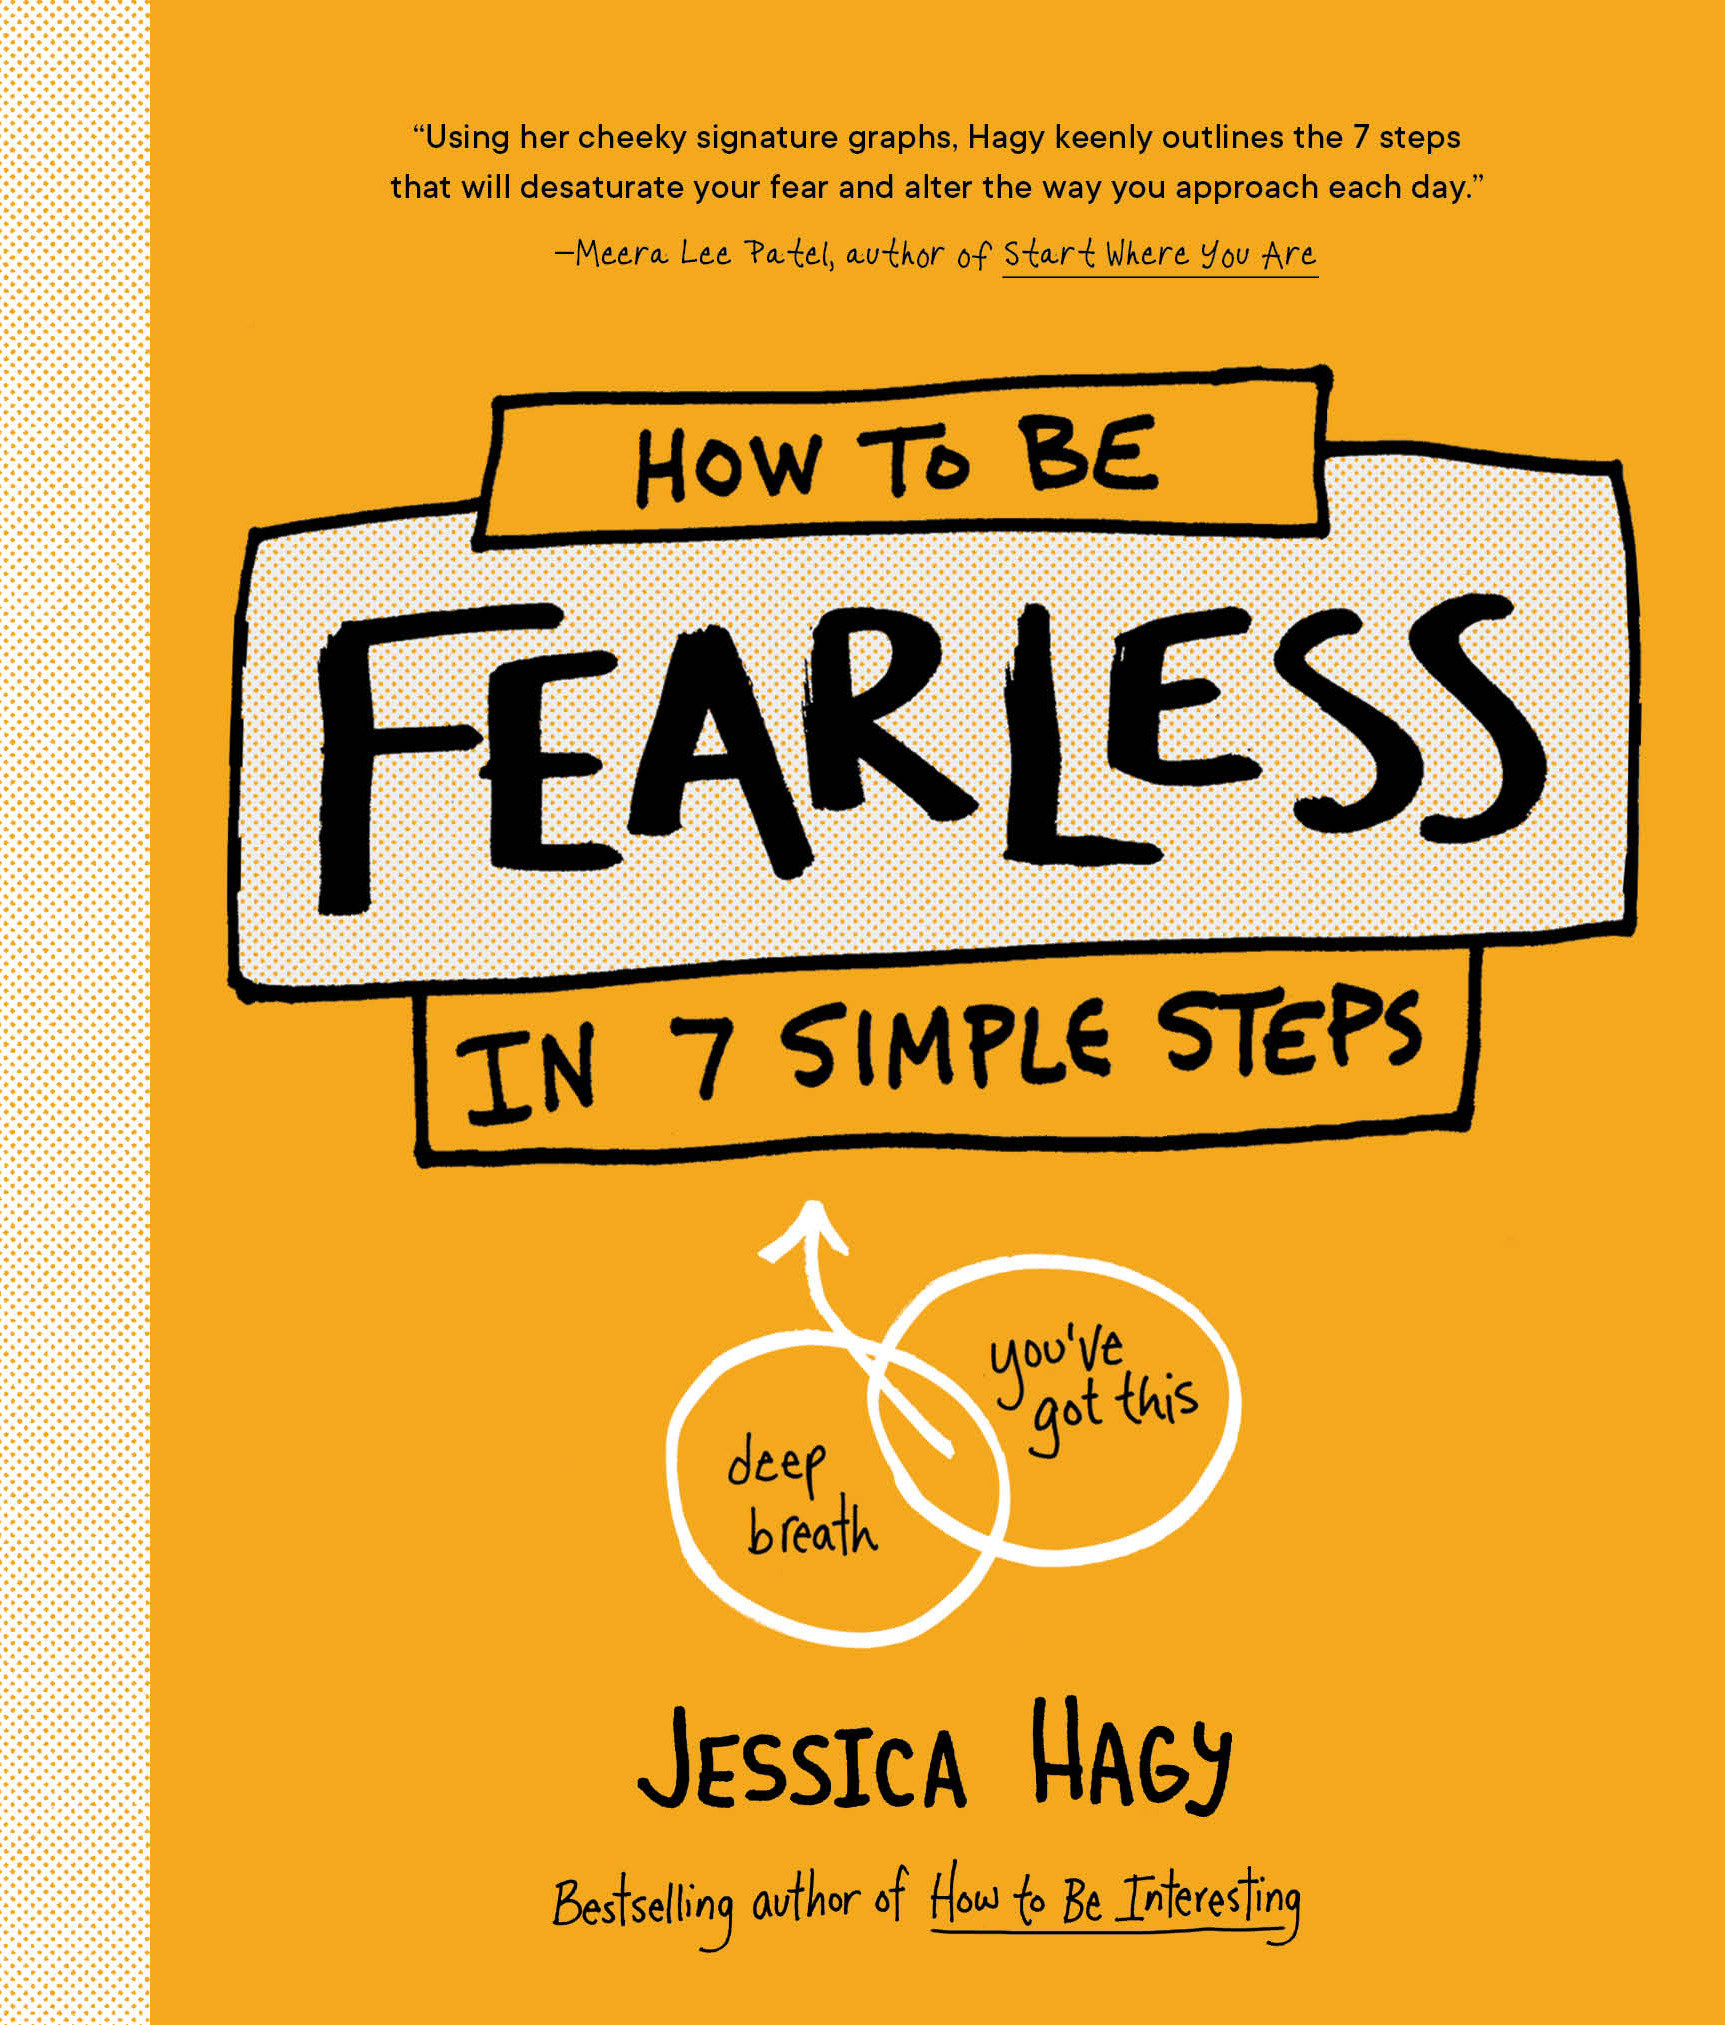 How To Be Fearless (Hardcover Book)